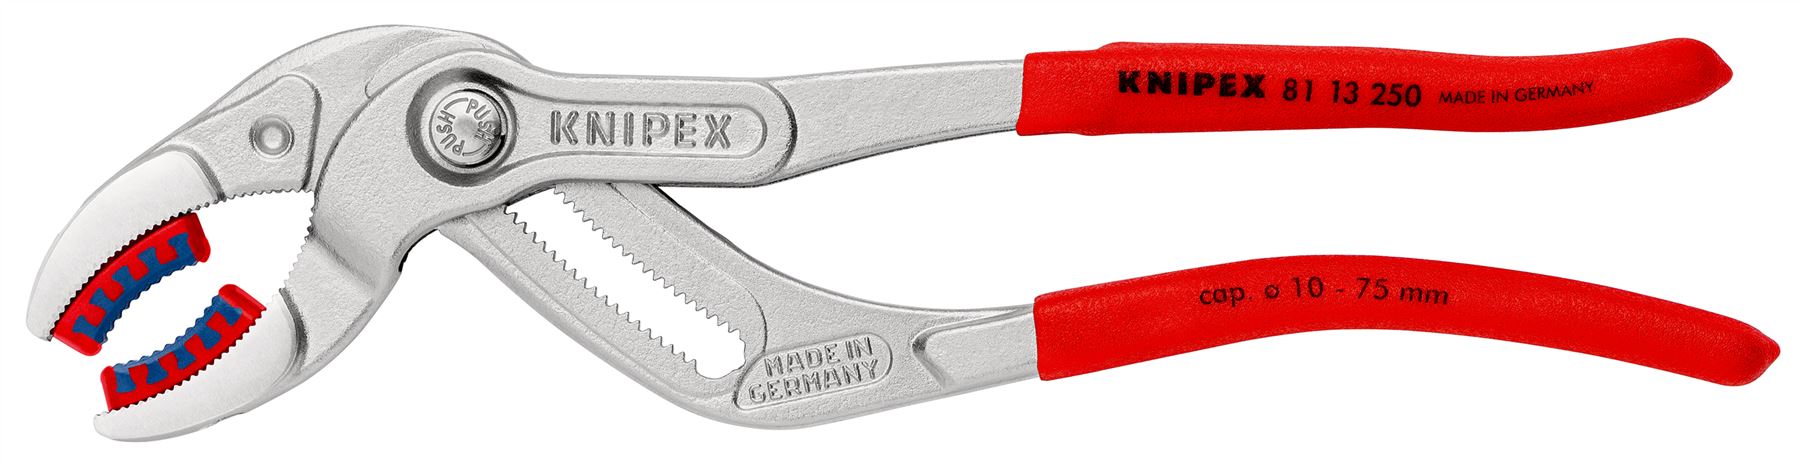 KNIPEX Siphon and Connector Pliers Plastic Jaws for Traps Tube Fittings Connectors 250mm Chrome Plastic Coated 81 13 250 SB